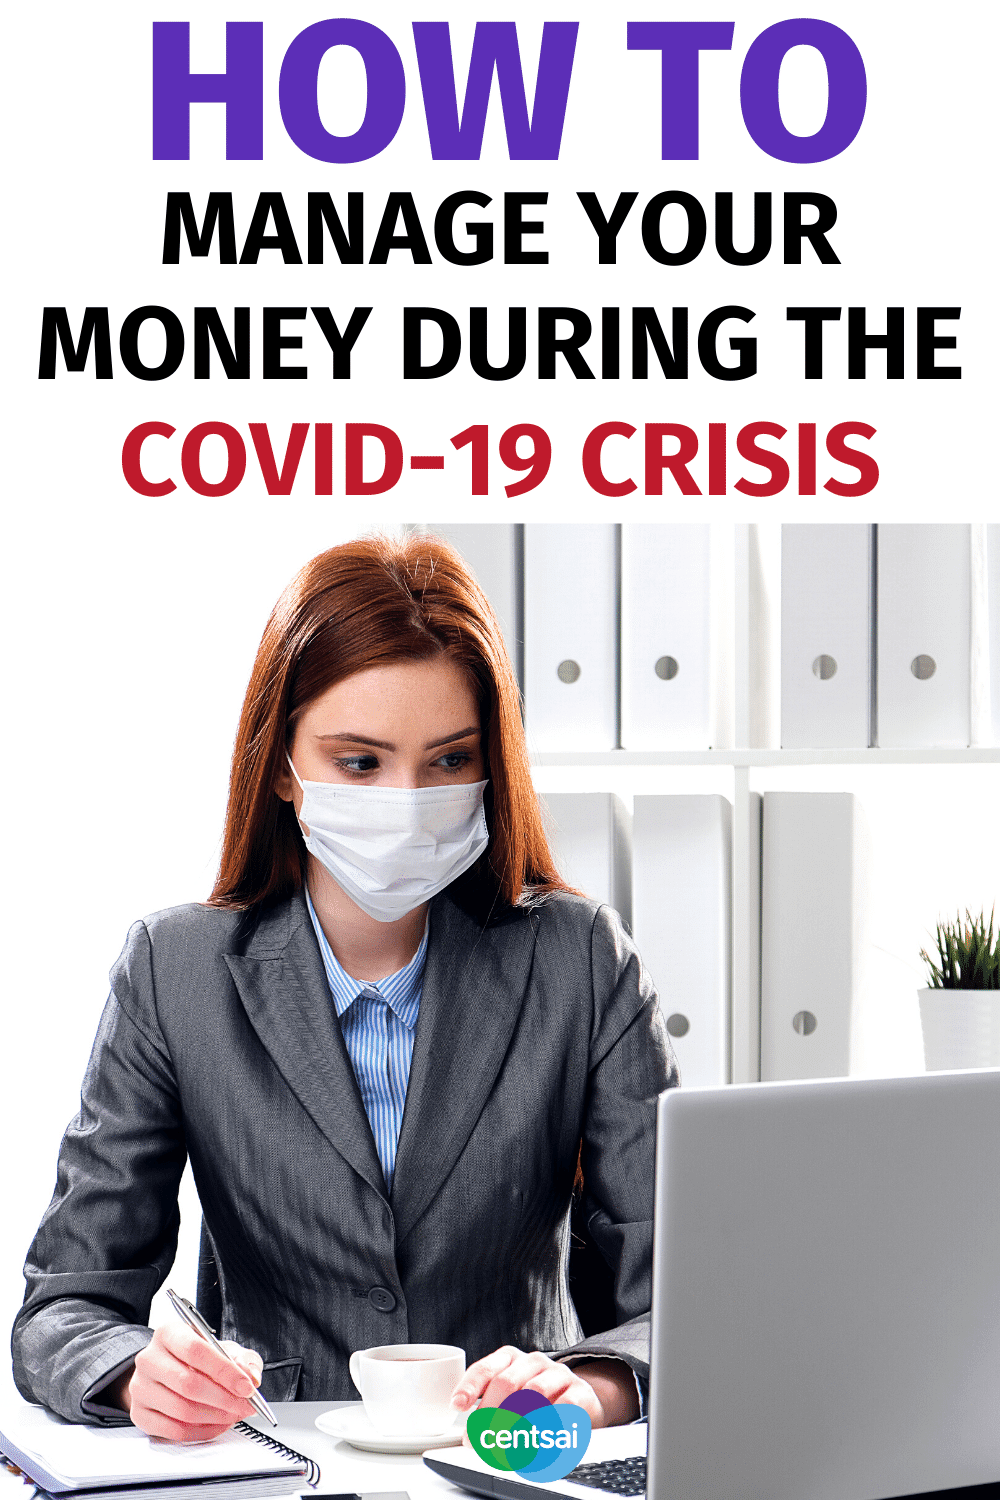 How to Manage Your Money during the COVID-19 Crisis